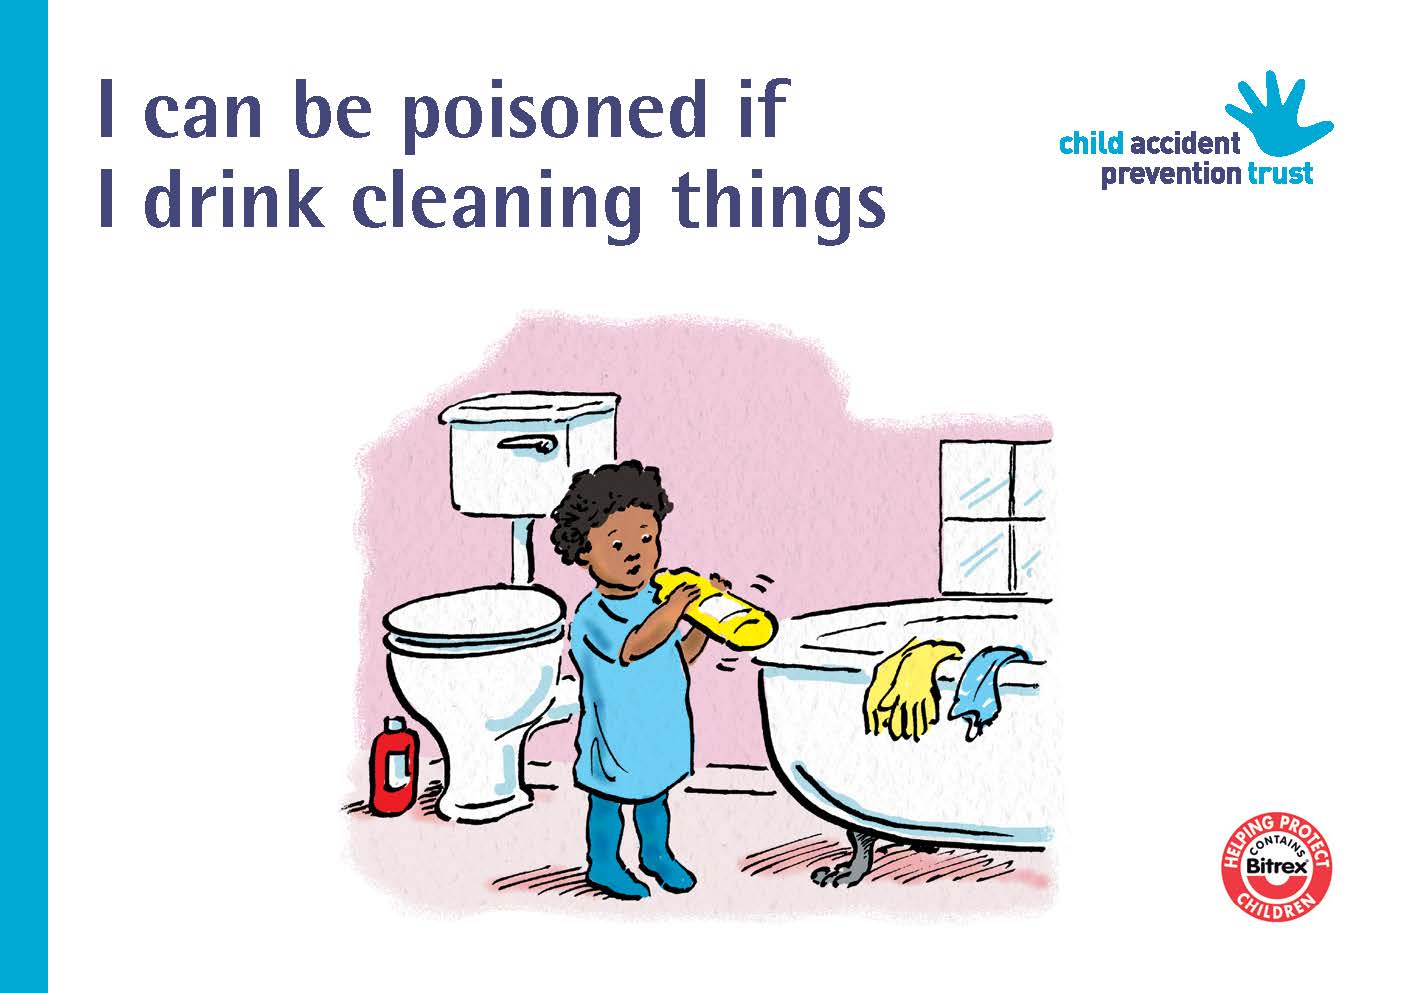 Prevent child poisoning from cleaning agents